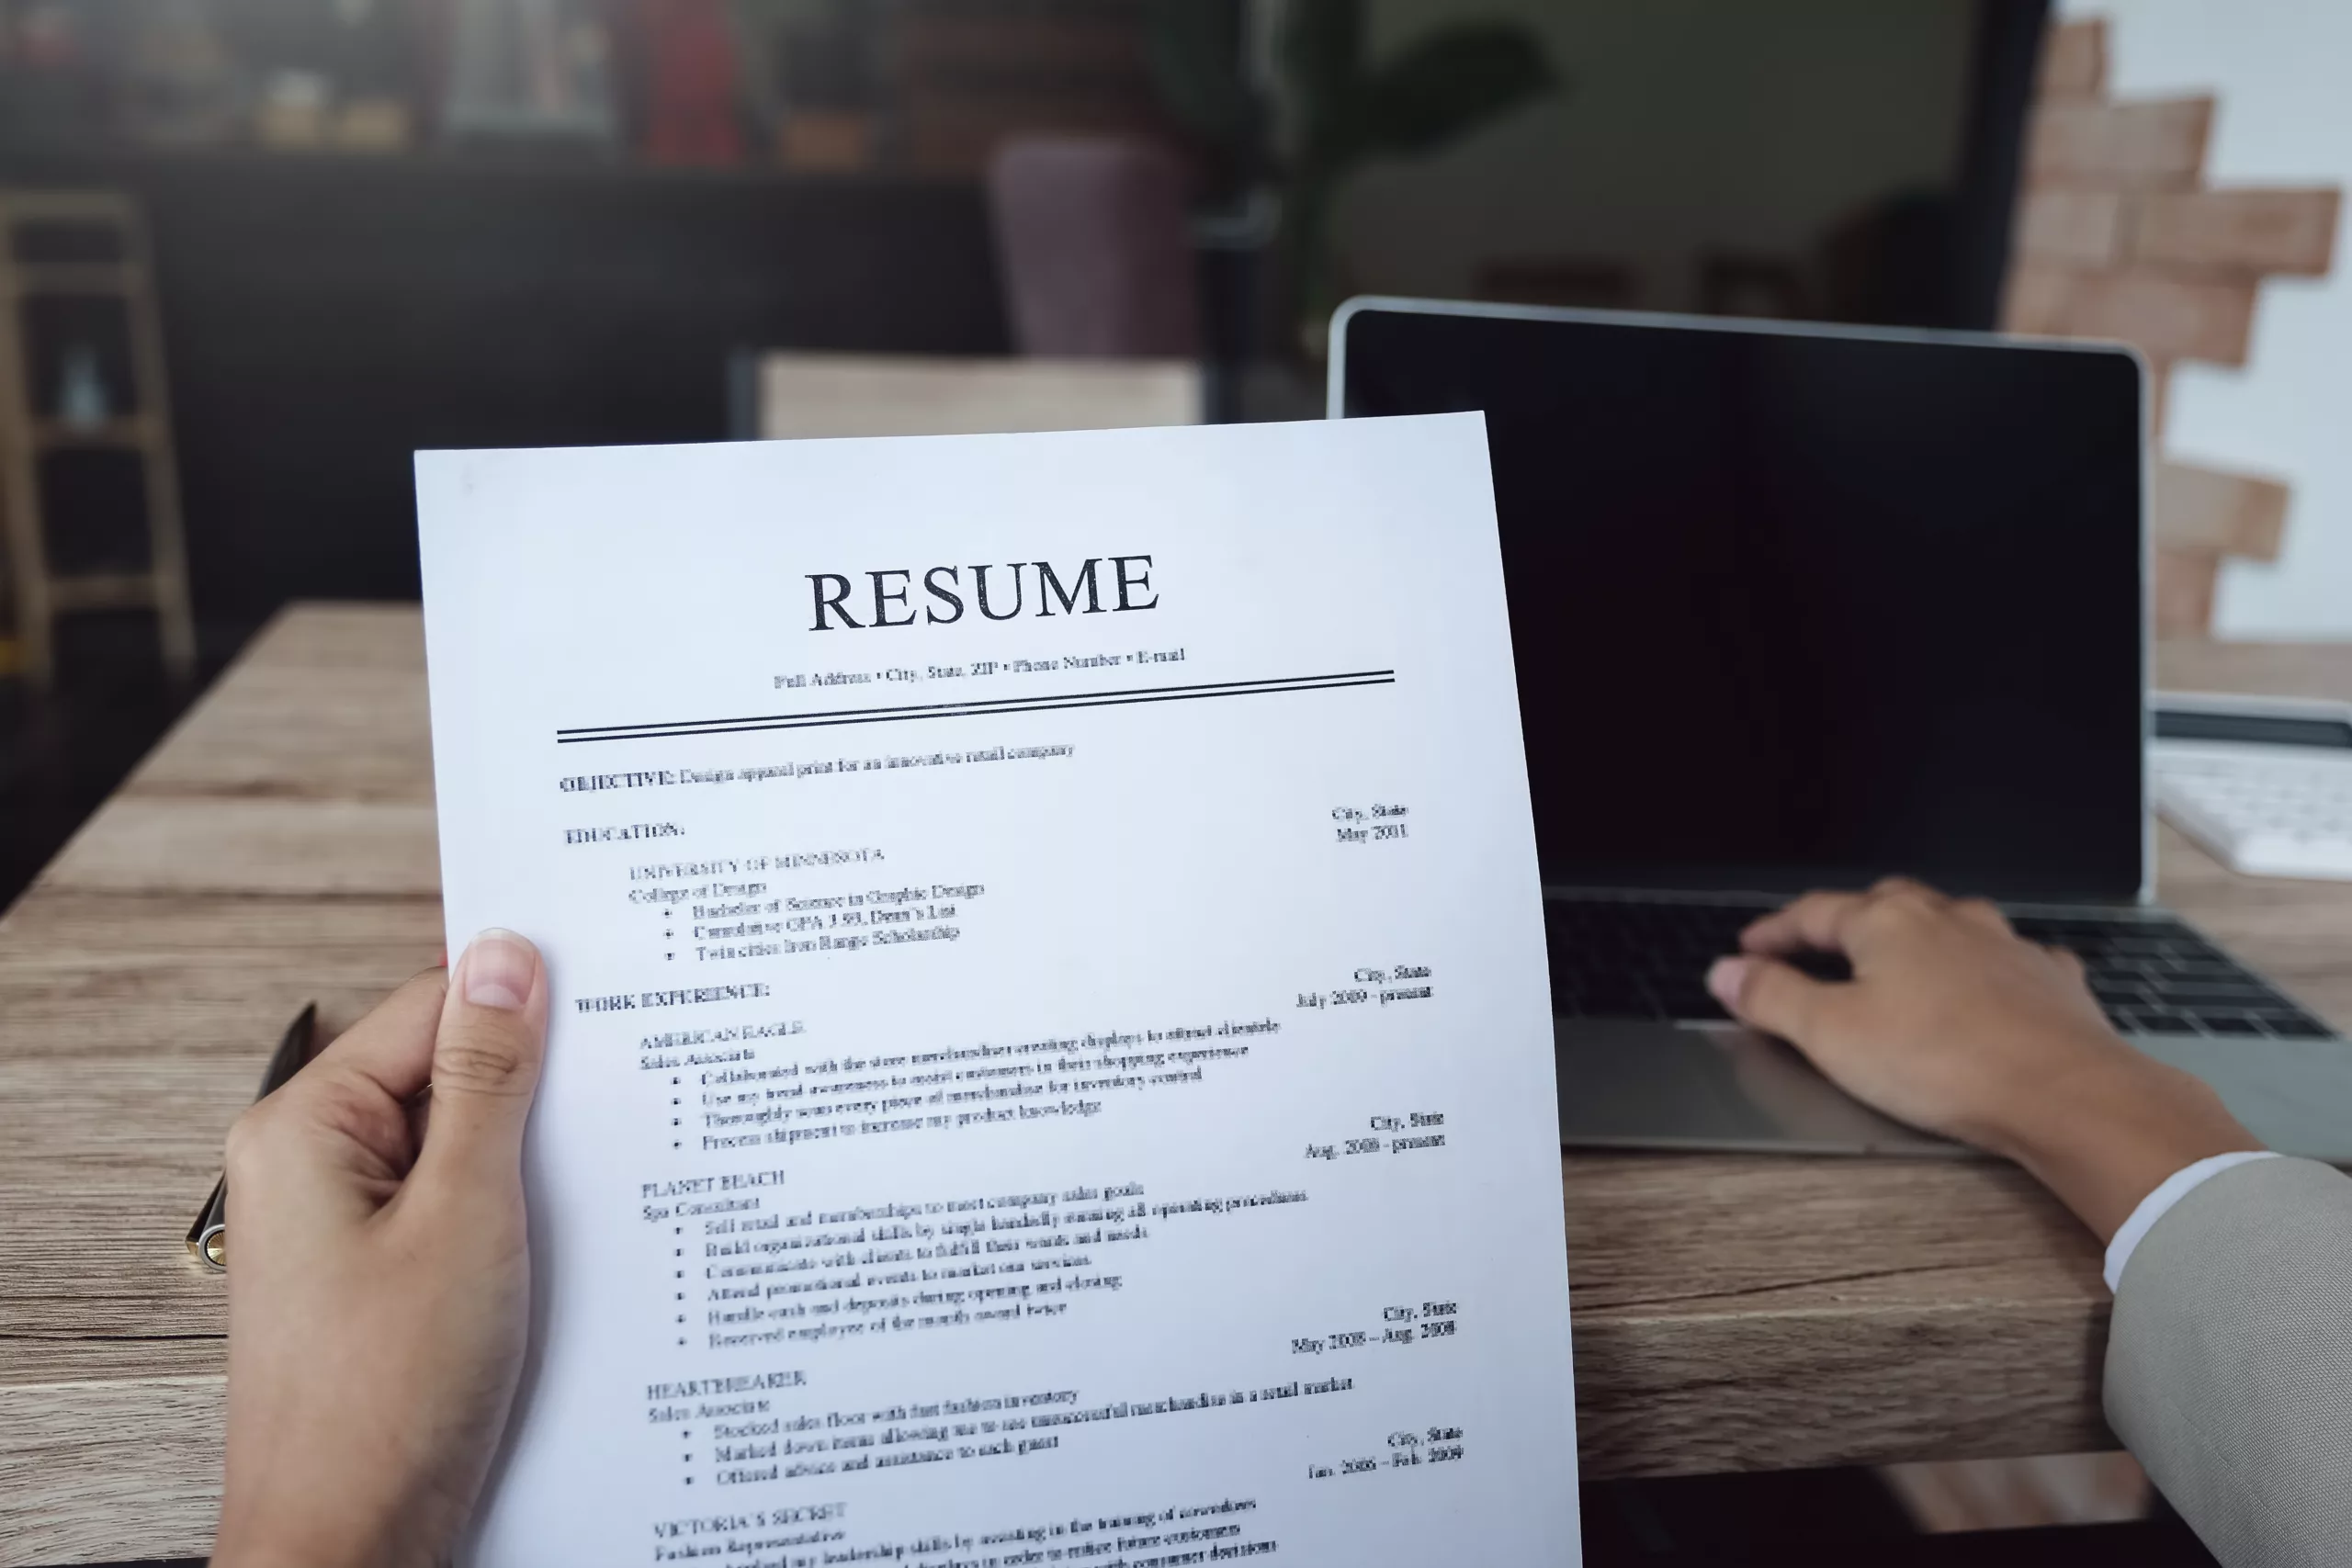 Professional holding their resume while using their laptop at a desk